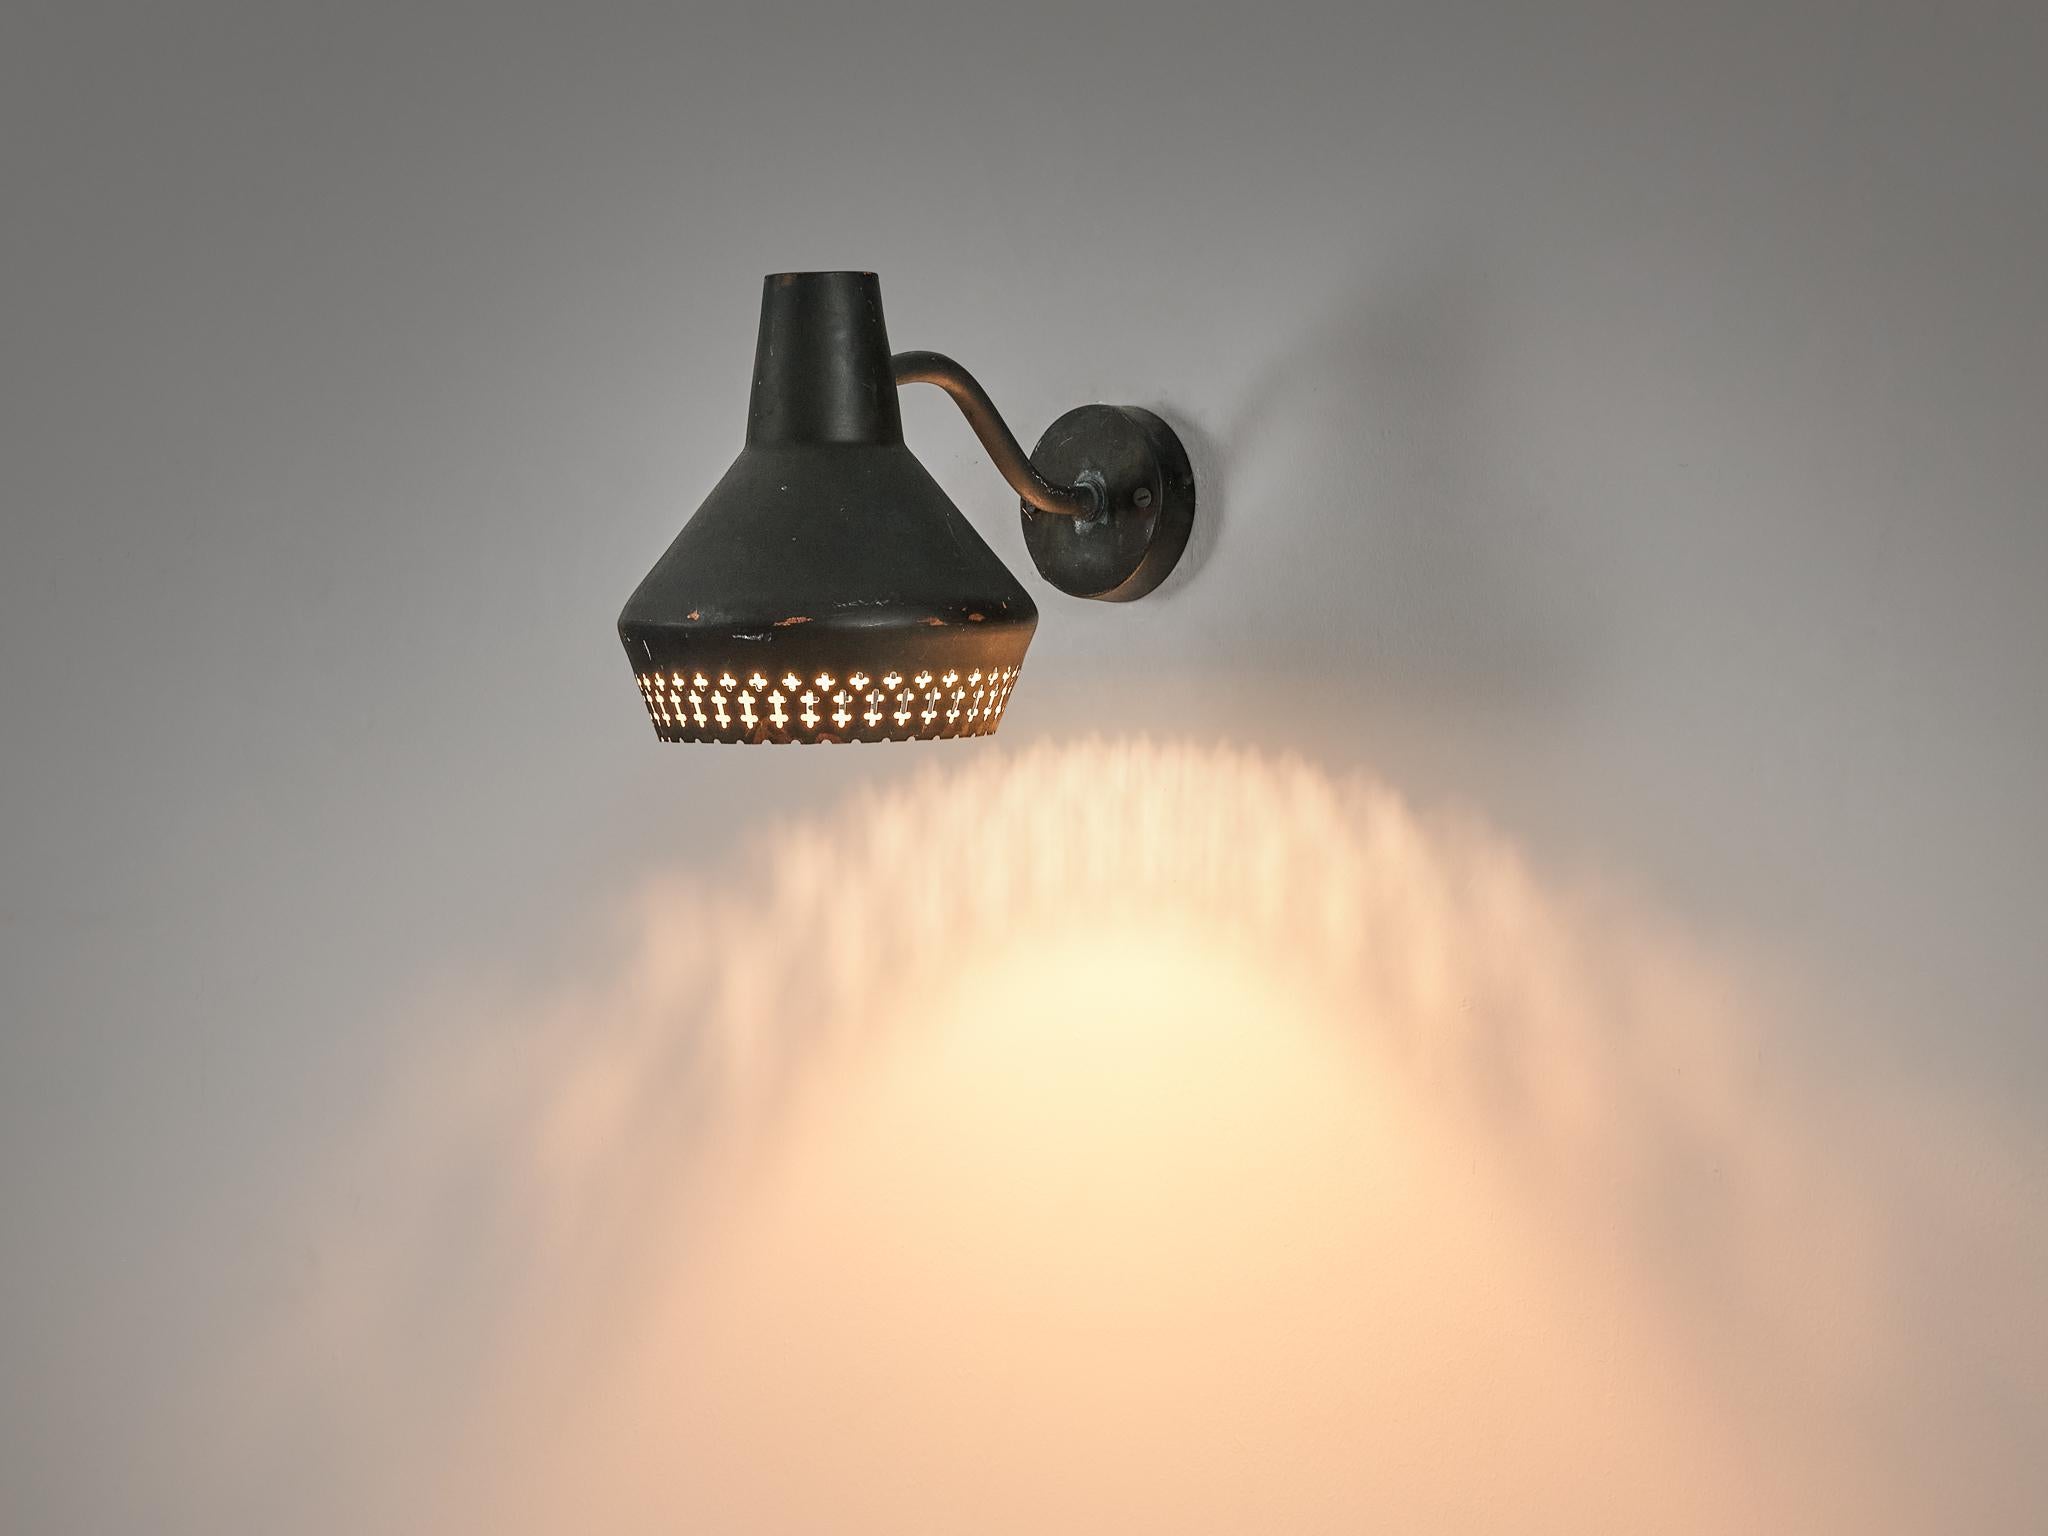 Hans Bergström for Ateljé Lyktan, wall light, copper, Sweden, 1940s.

A highly well-executed wall lamp of the 1940s by Hans Bergström for Atelje Lyktan that is currently hard to find. Bergström used copper for this specific design that obtained